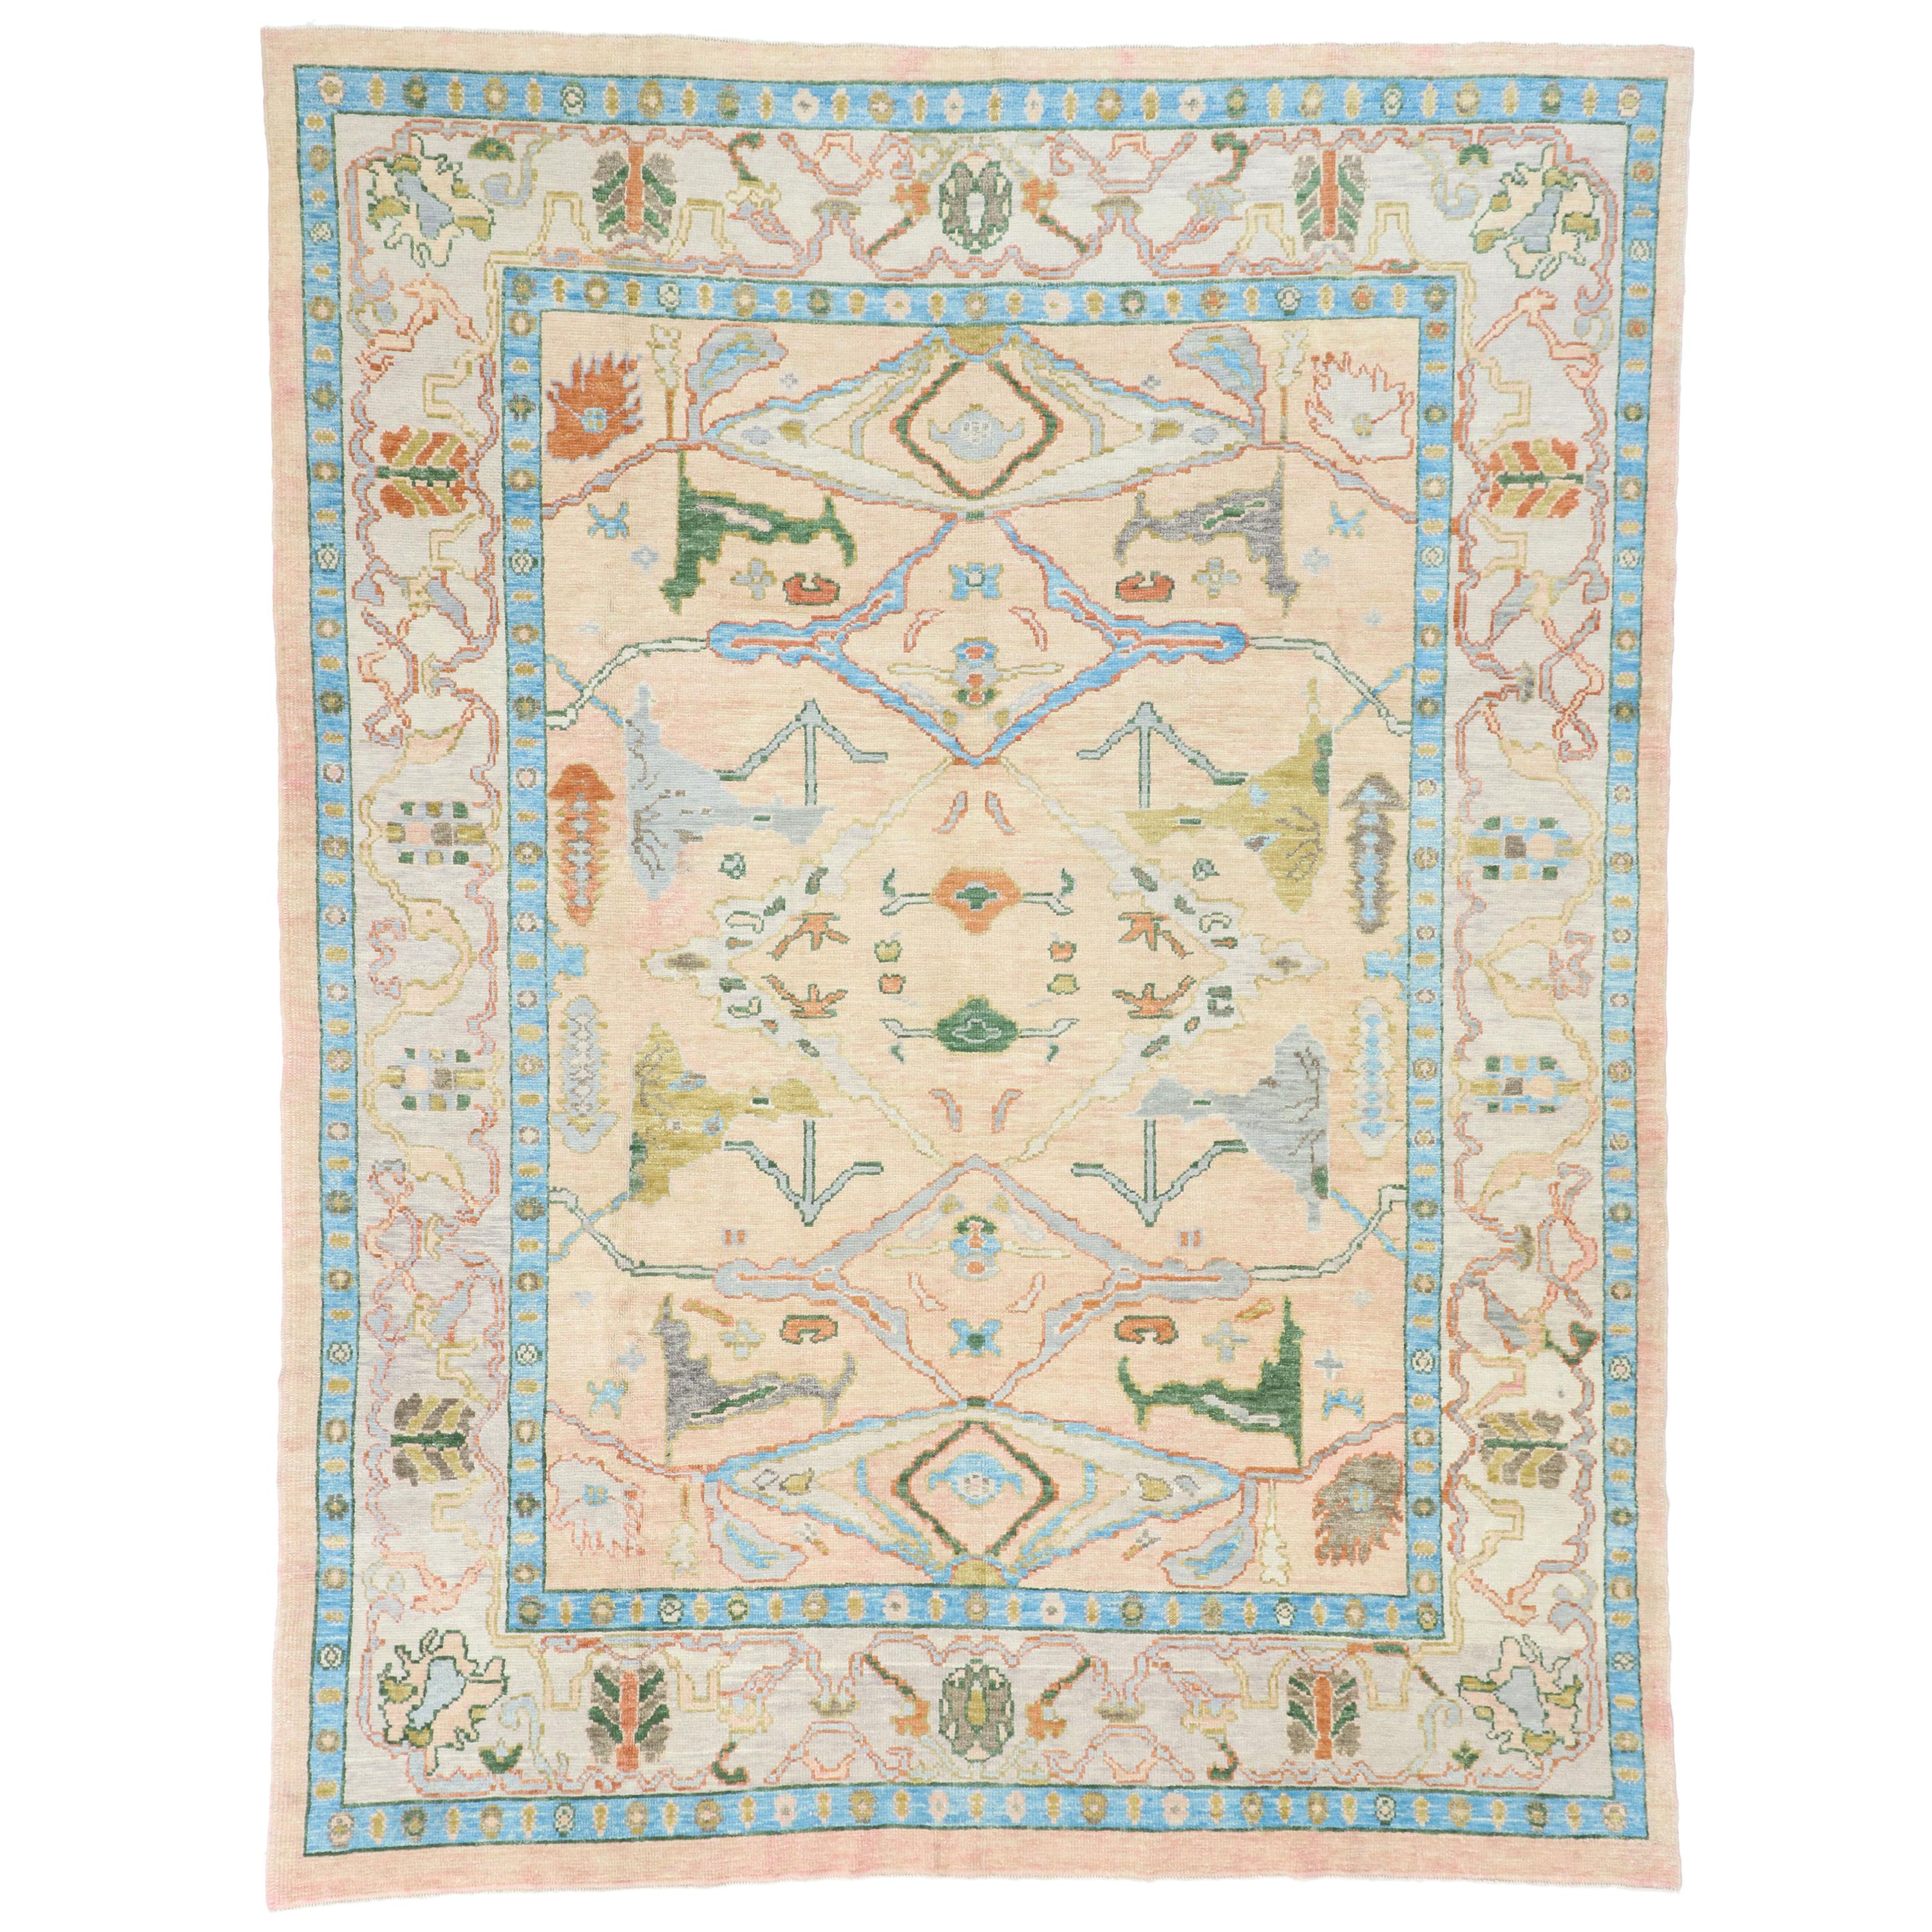 New Contemporary Turkish Oushak Rug with Memphis Style and Pastel Colors